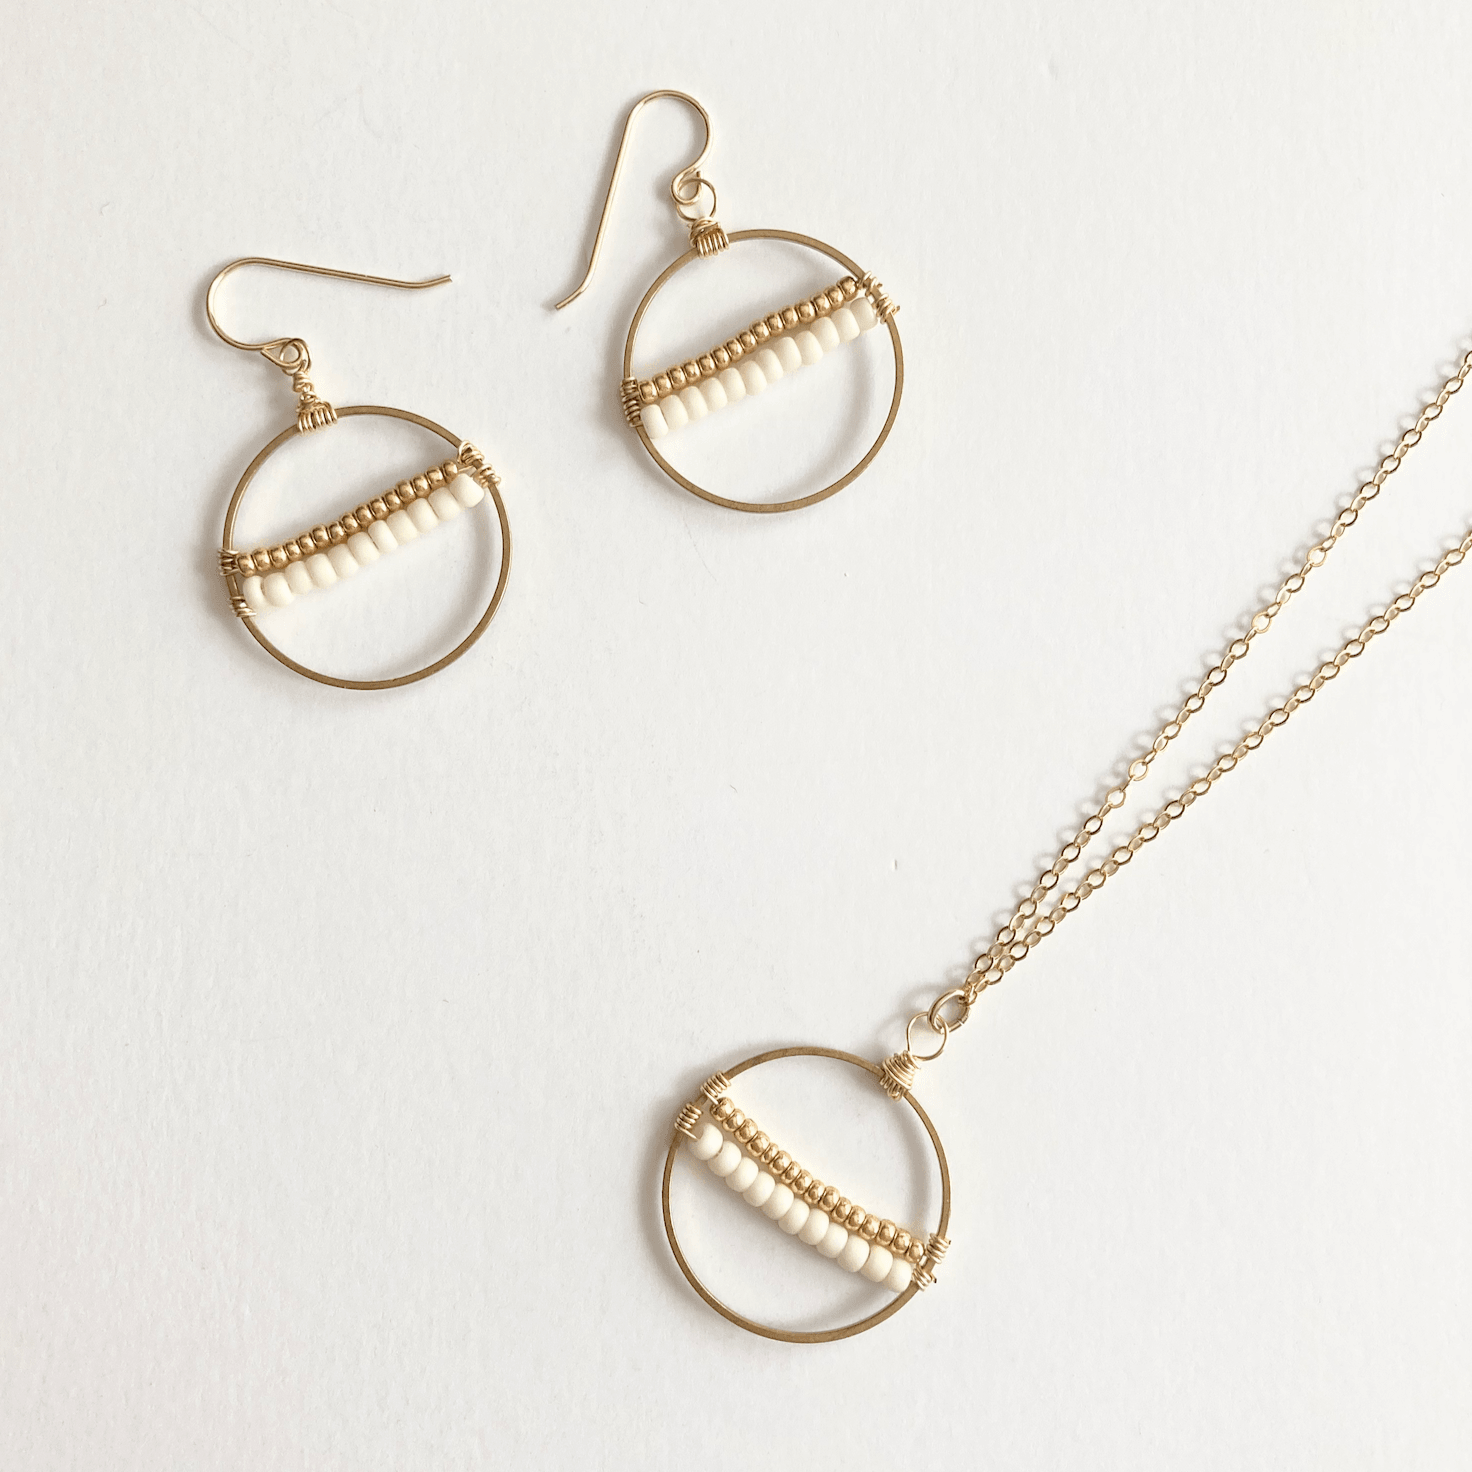 Inspired by the seeds of hope brought by our newest artisans from Afghanistan, this necklace will remind you of the hope available for all of us. Encircled by a hoop of gold-fill wire, cream and white seeds are held in perfect tension. Refugee made gifts. Fashion for good.